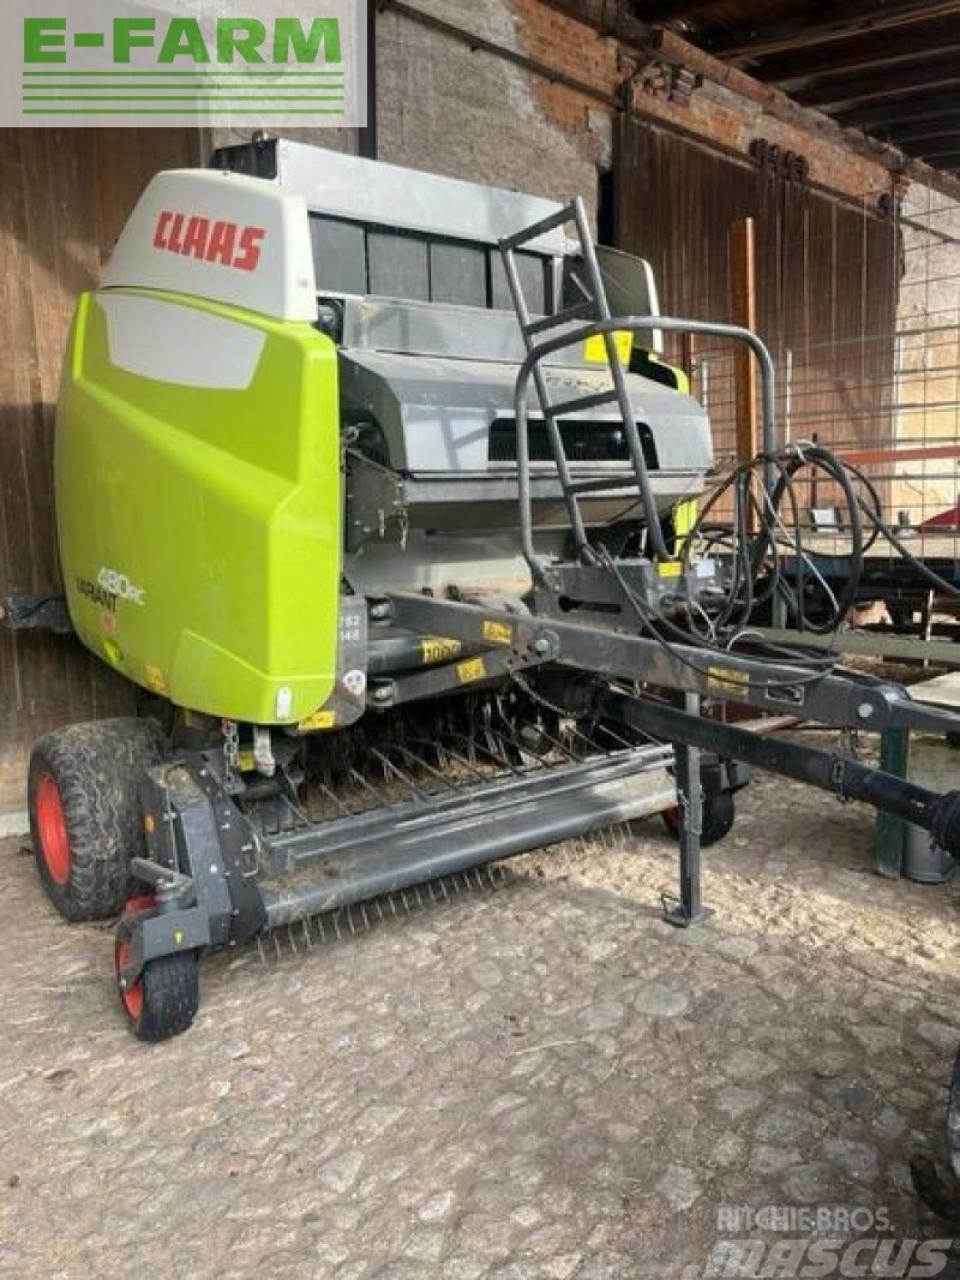 CLAAS variant 480 rc Square balers